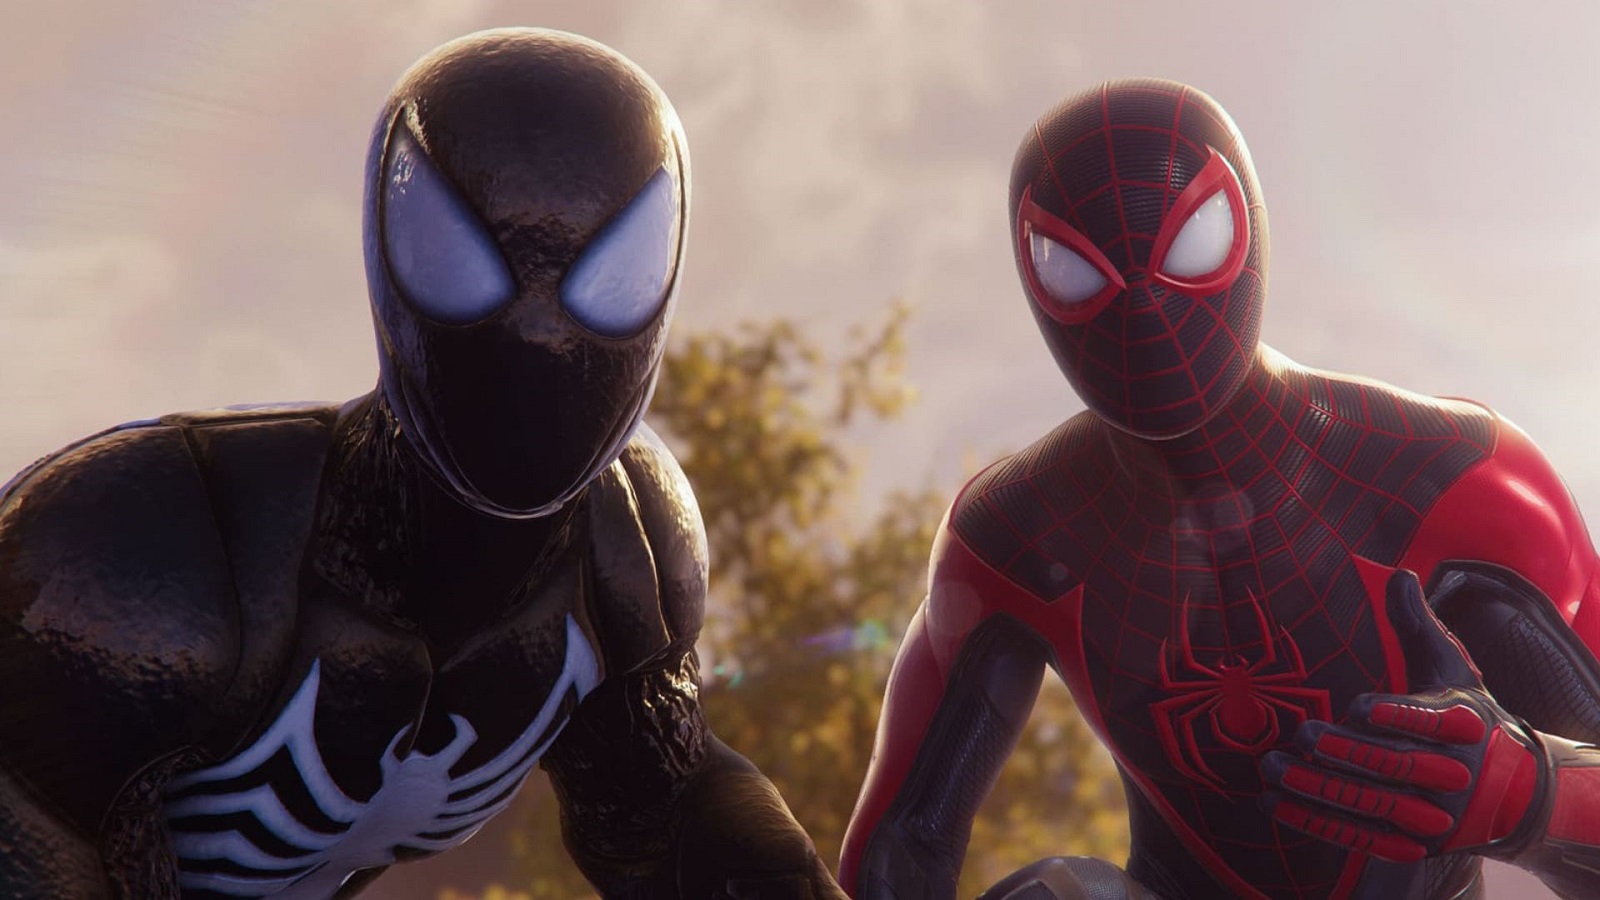 Marvel's Spider-Man 2 platforms: Is it coming to PS4, PC, or Xbox